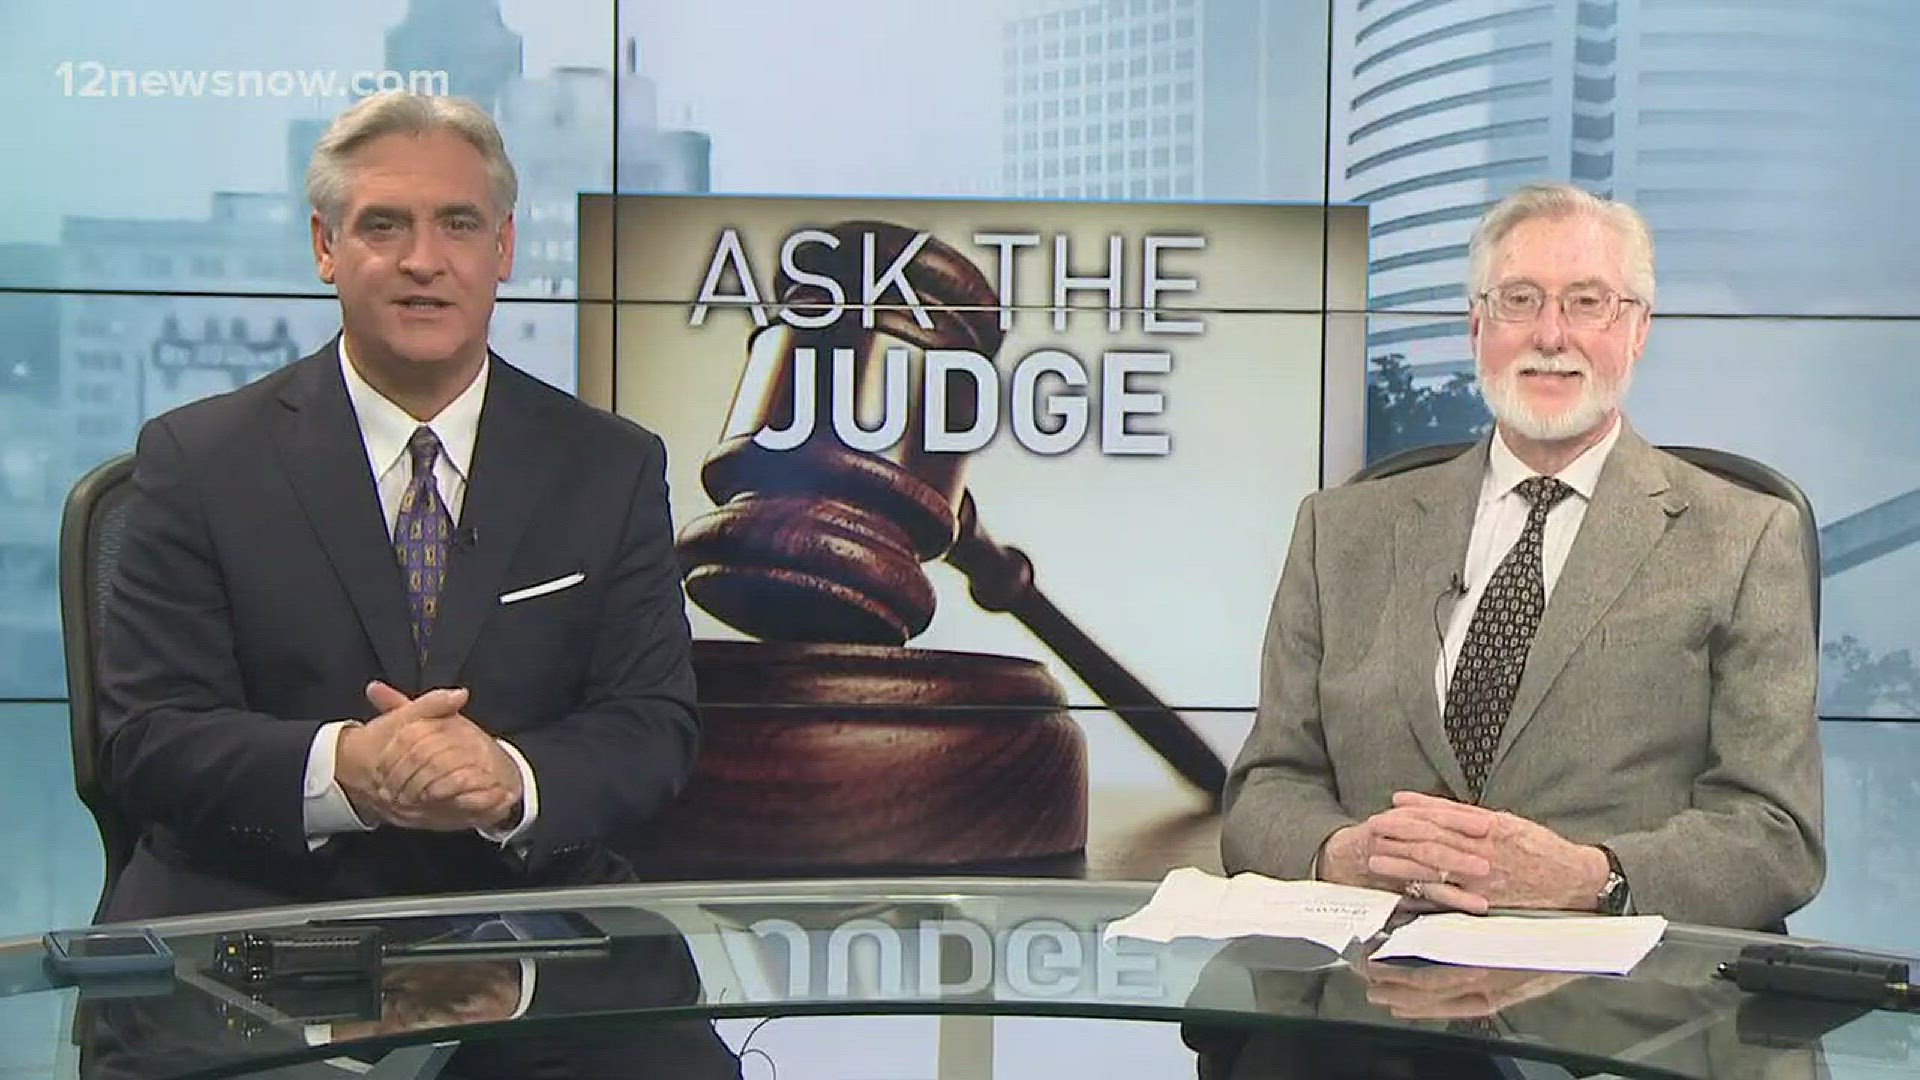 Judge Larry Thorne answers your legal questions about legal liability, noisy neighbors, and child abuse charges.